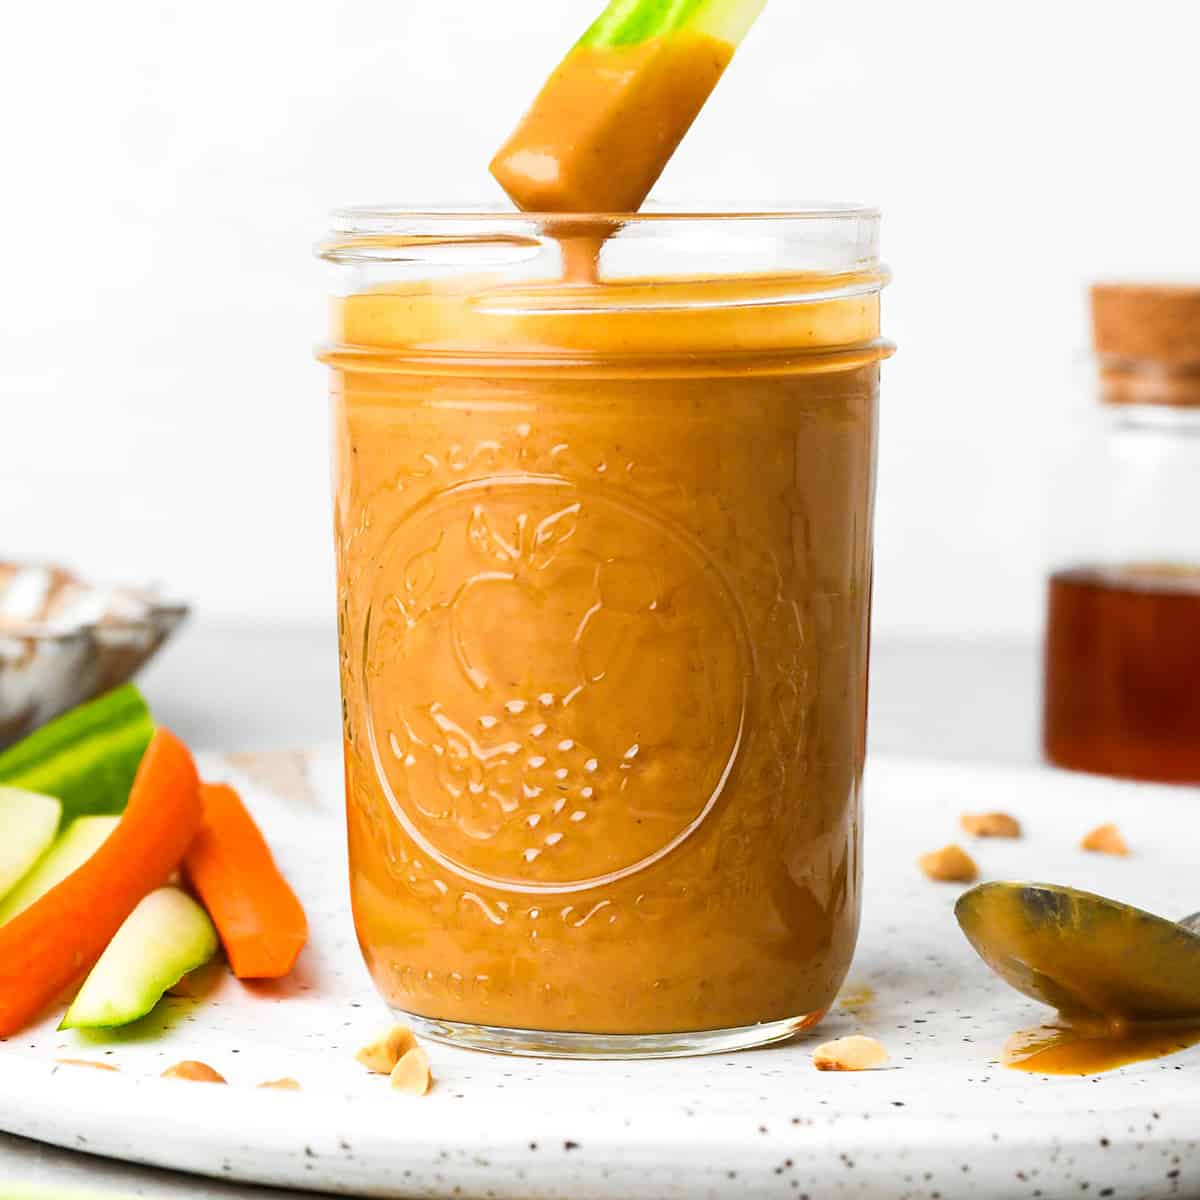 celery being dipped into a jar of peanut sauce